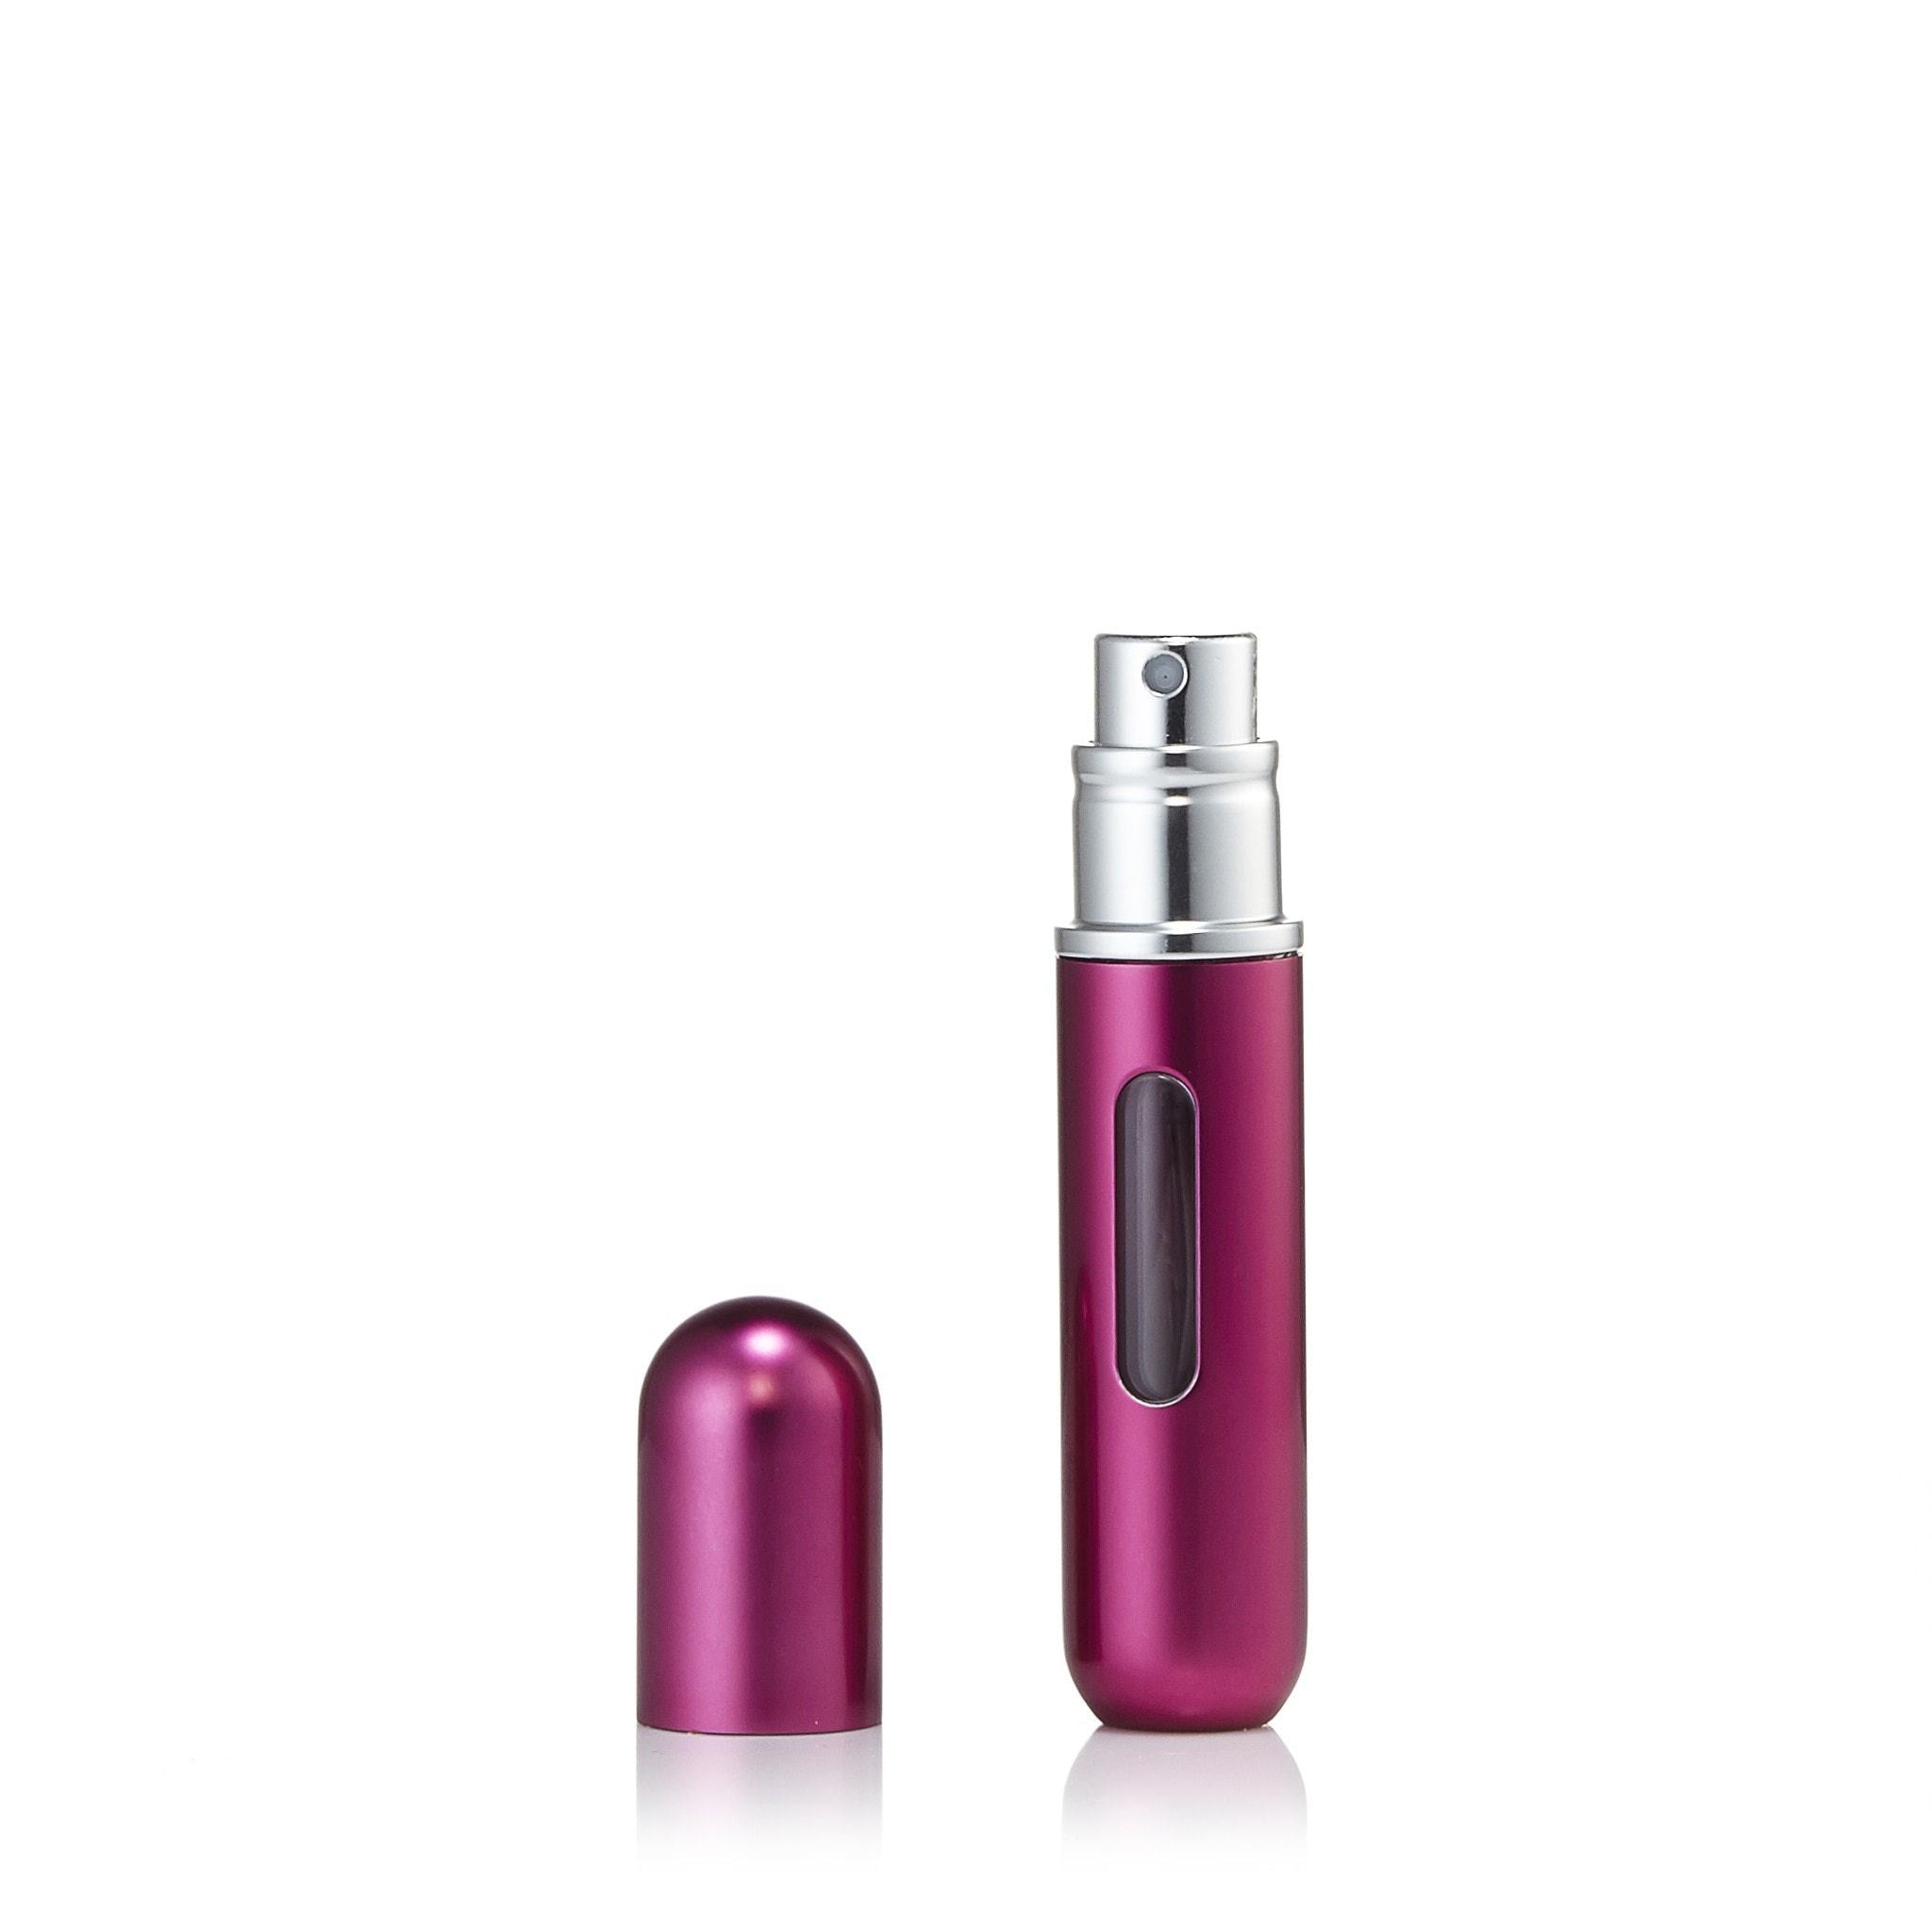 by Fill Atomizer Flo Pump Perfumania – and Fragrance